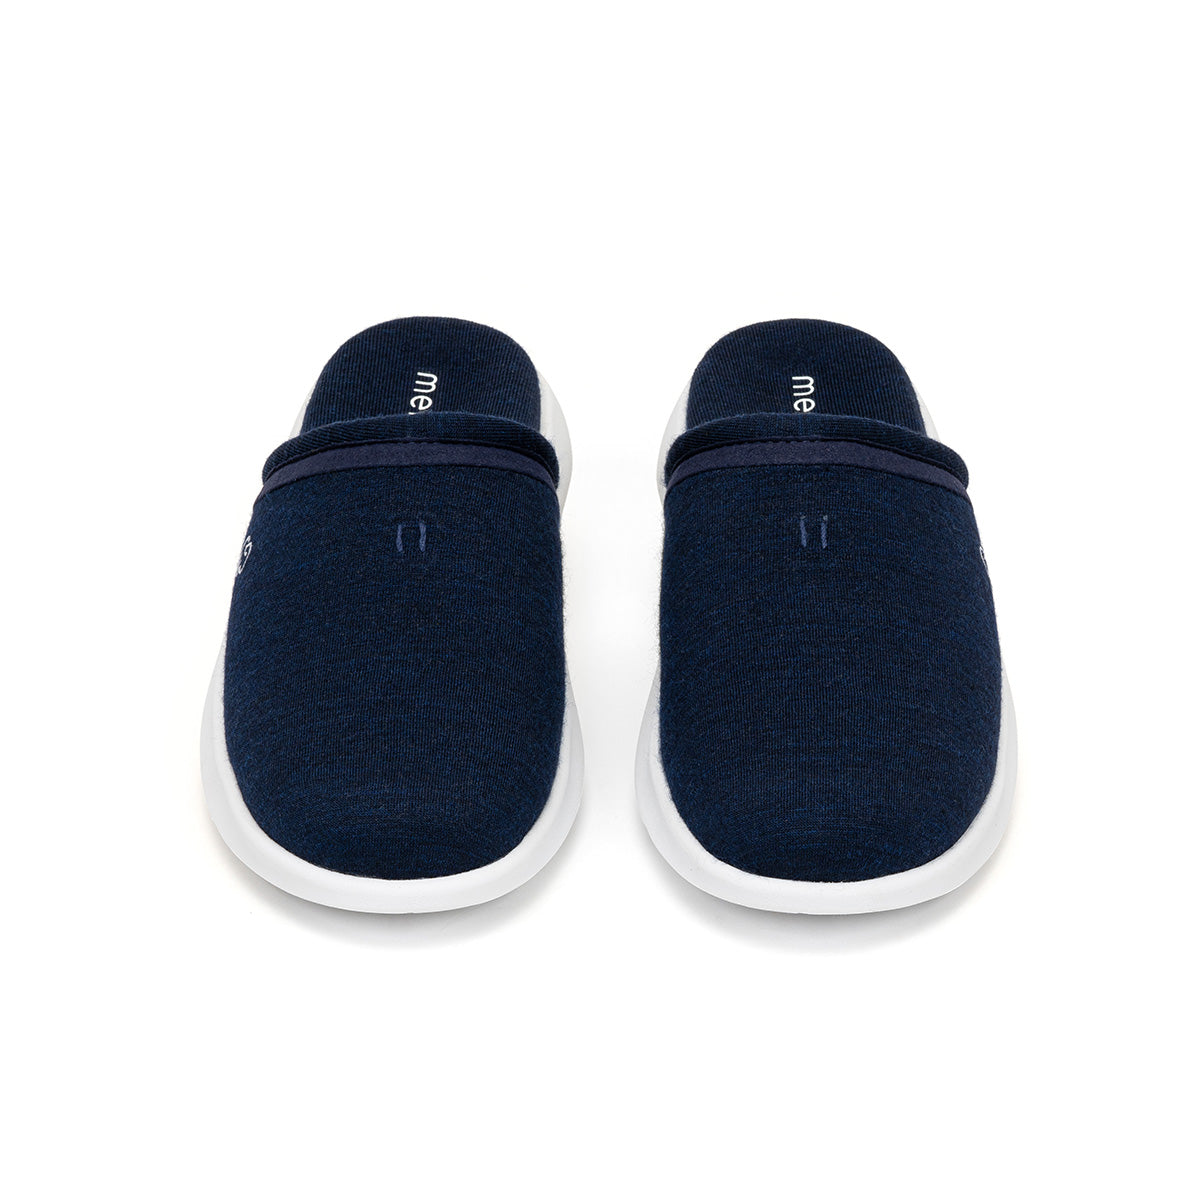 Women's Mules Navy - Special Offer